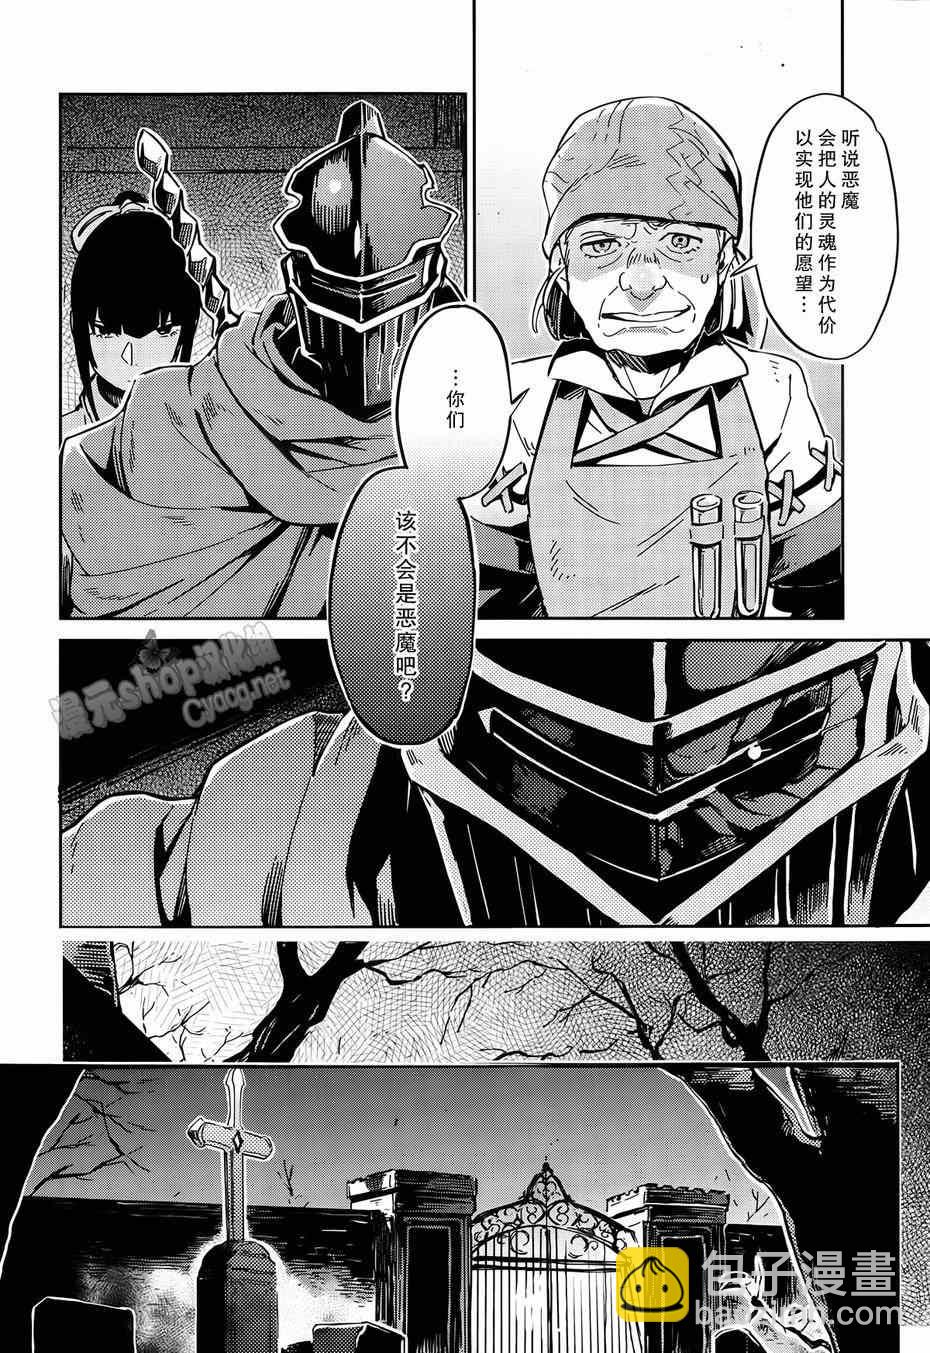 OVERLORD - 第7话 - 2